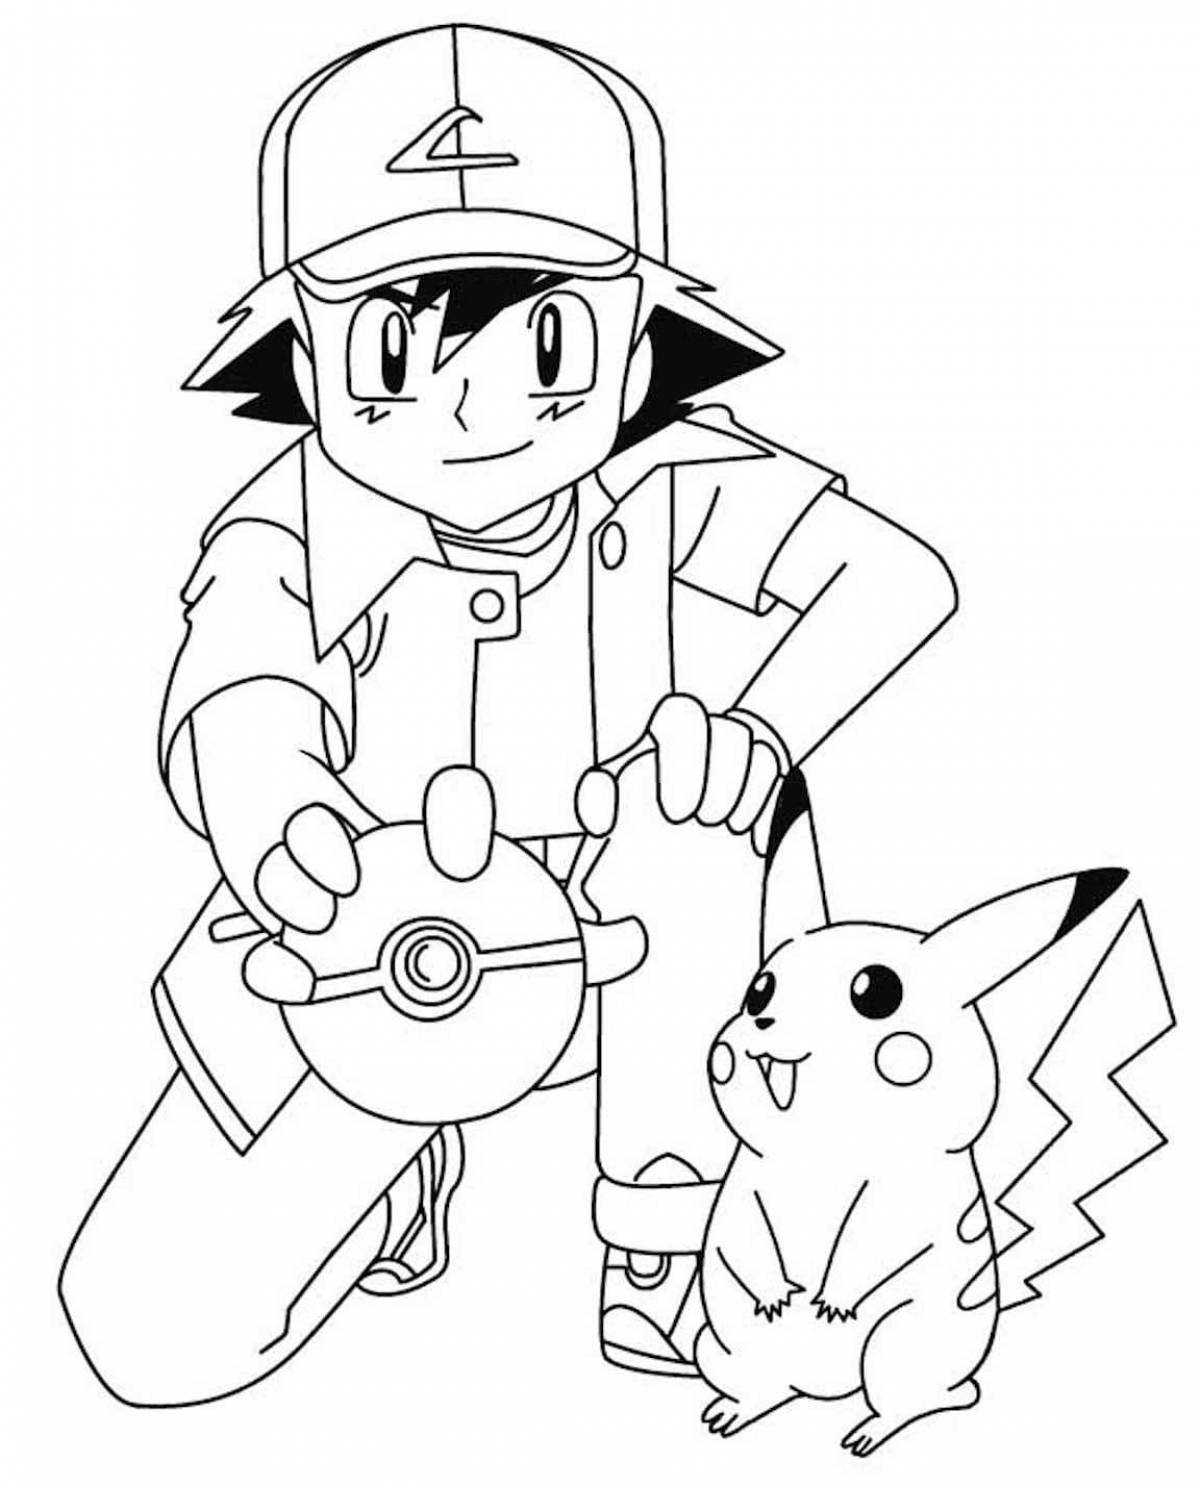 Amazing pikachu coloring pages for kids